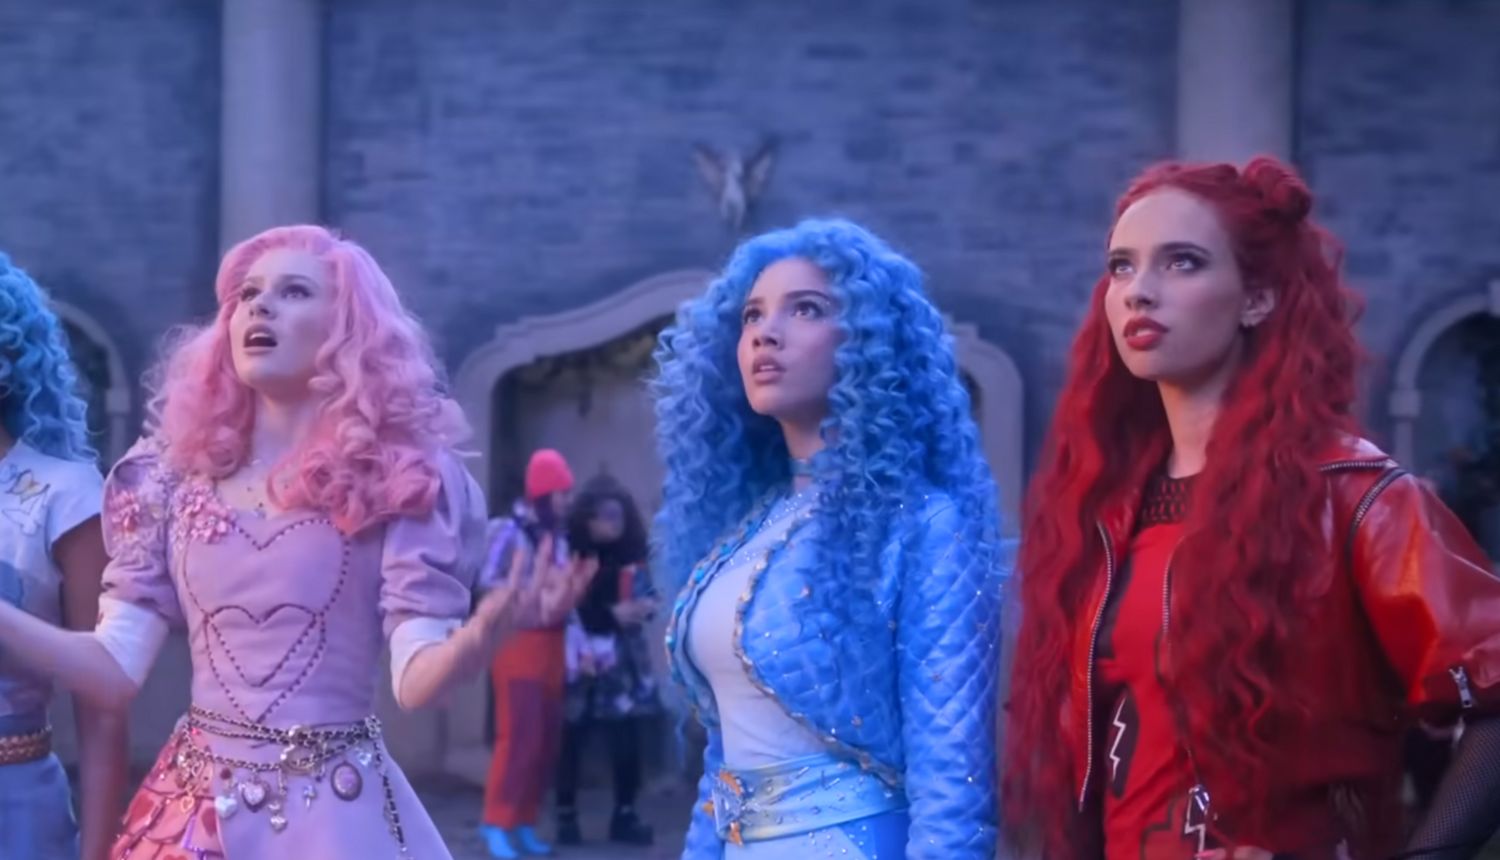 Descendants: The Rise of Red (2024)